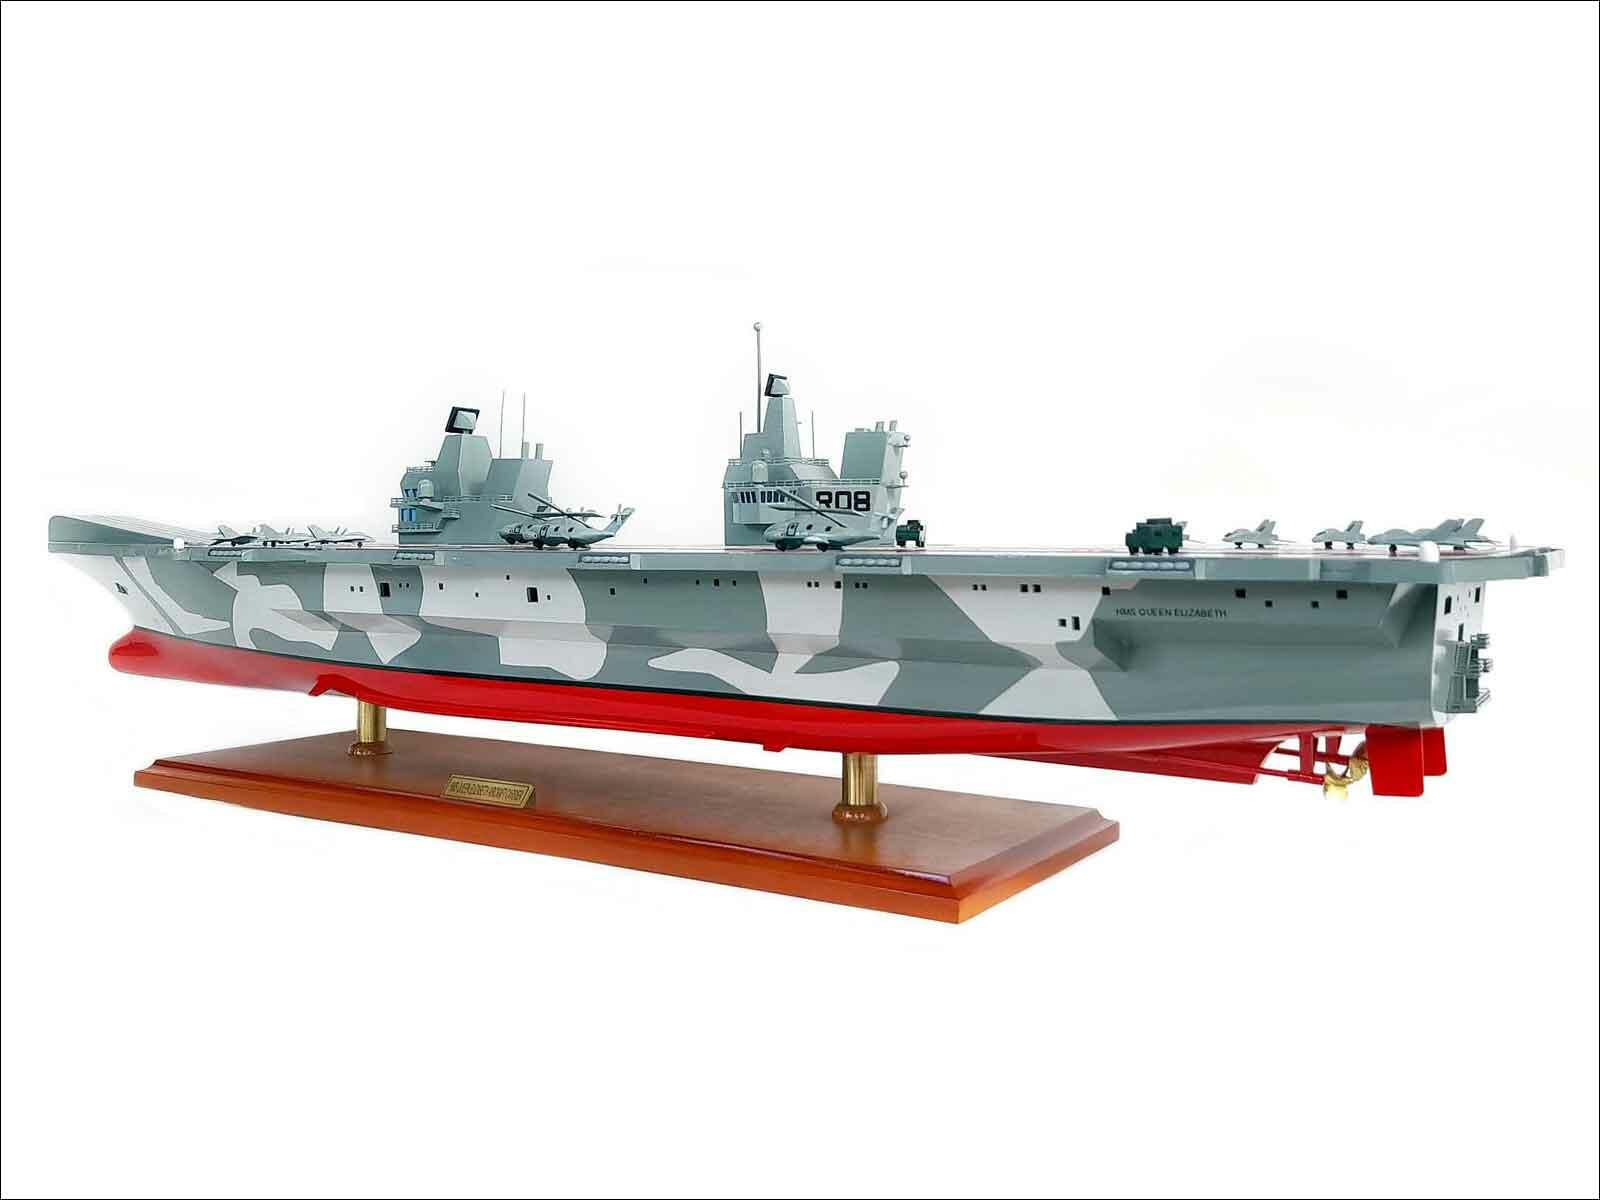 HMS Queen Elizabeth Aircraft Carrier R08 with Camouflage model